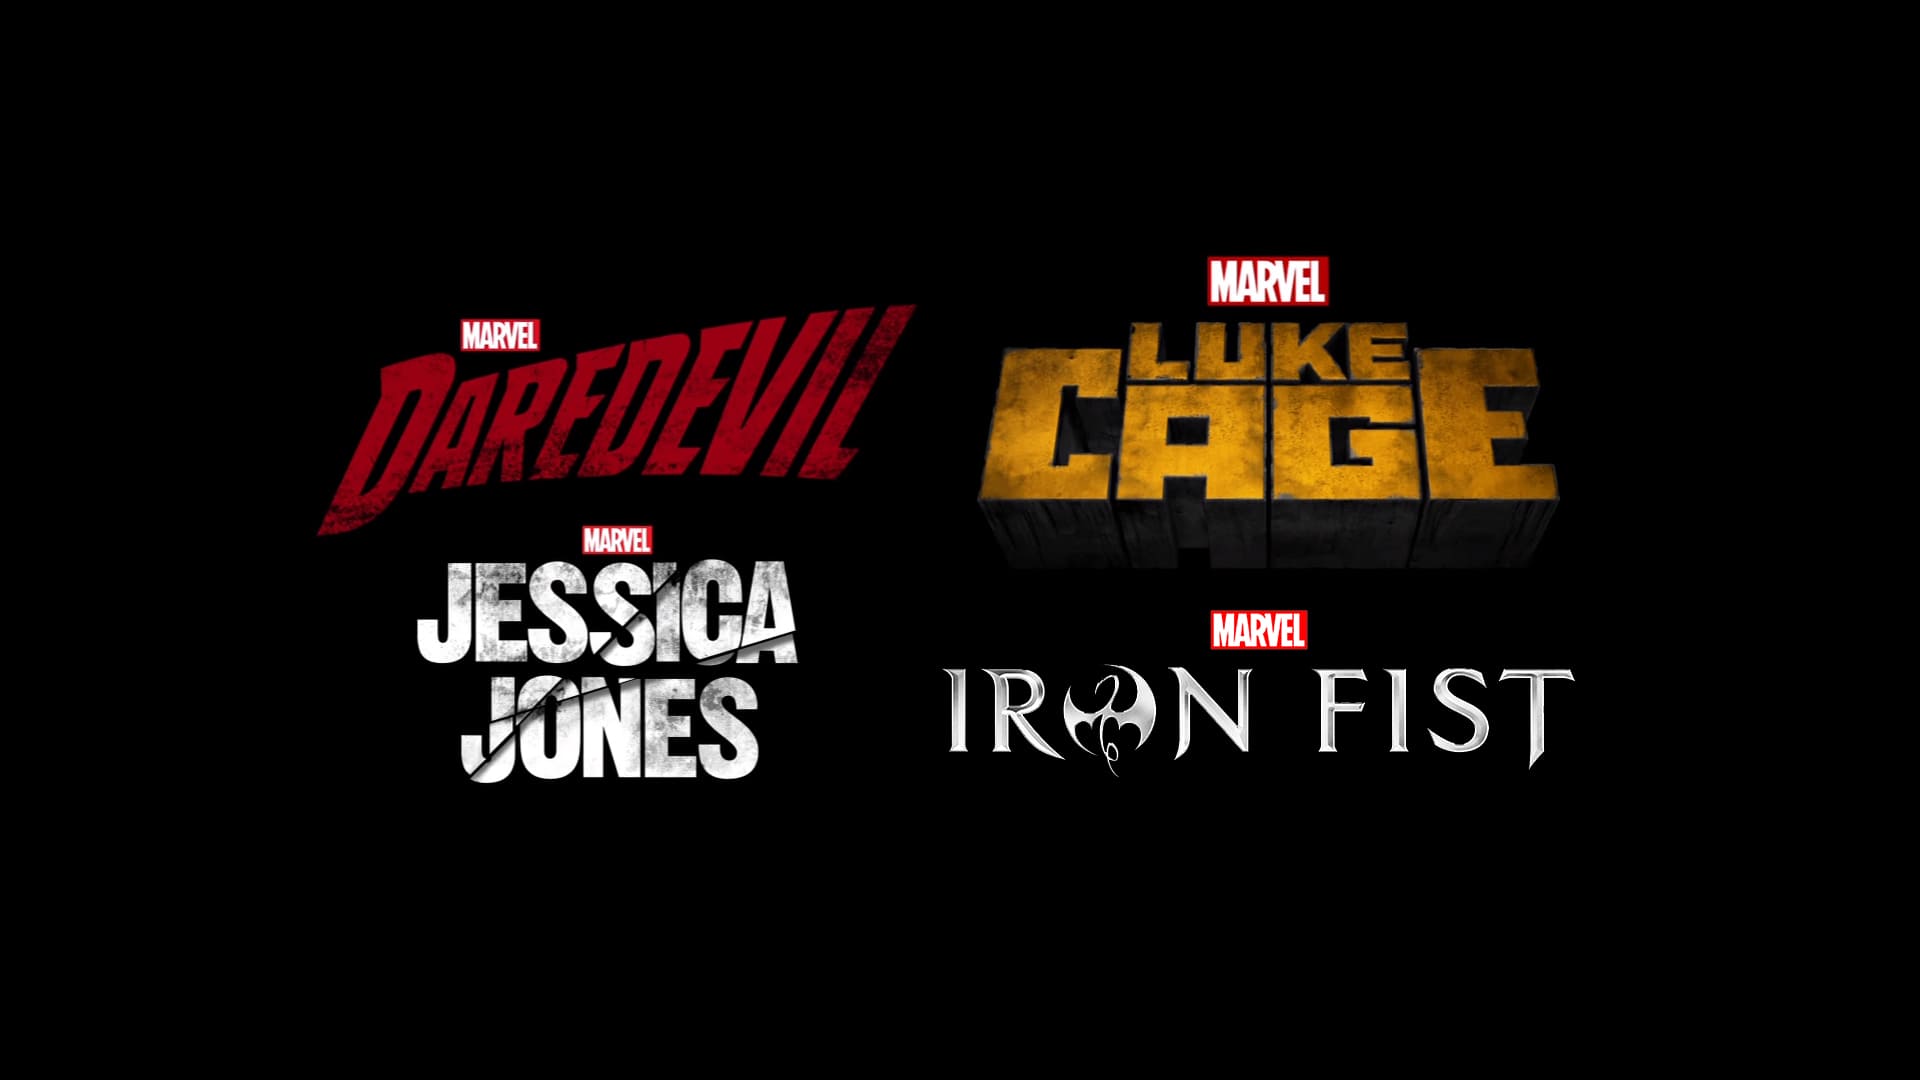 First Netflix Logo - The Defenders Timeline Explained | Player.One